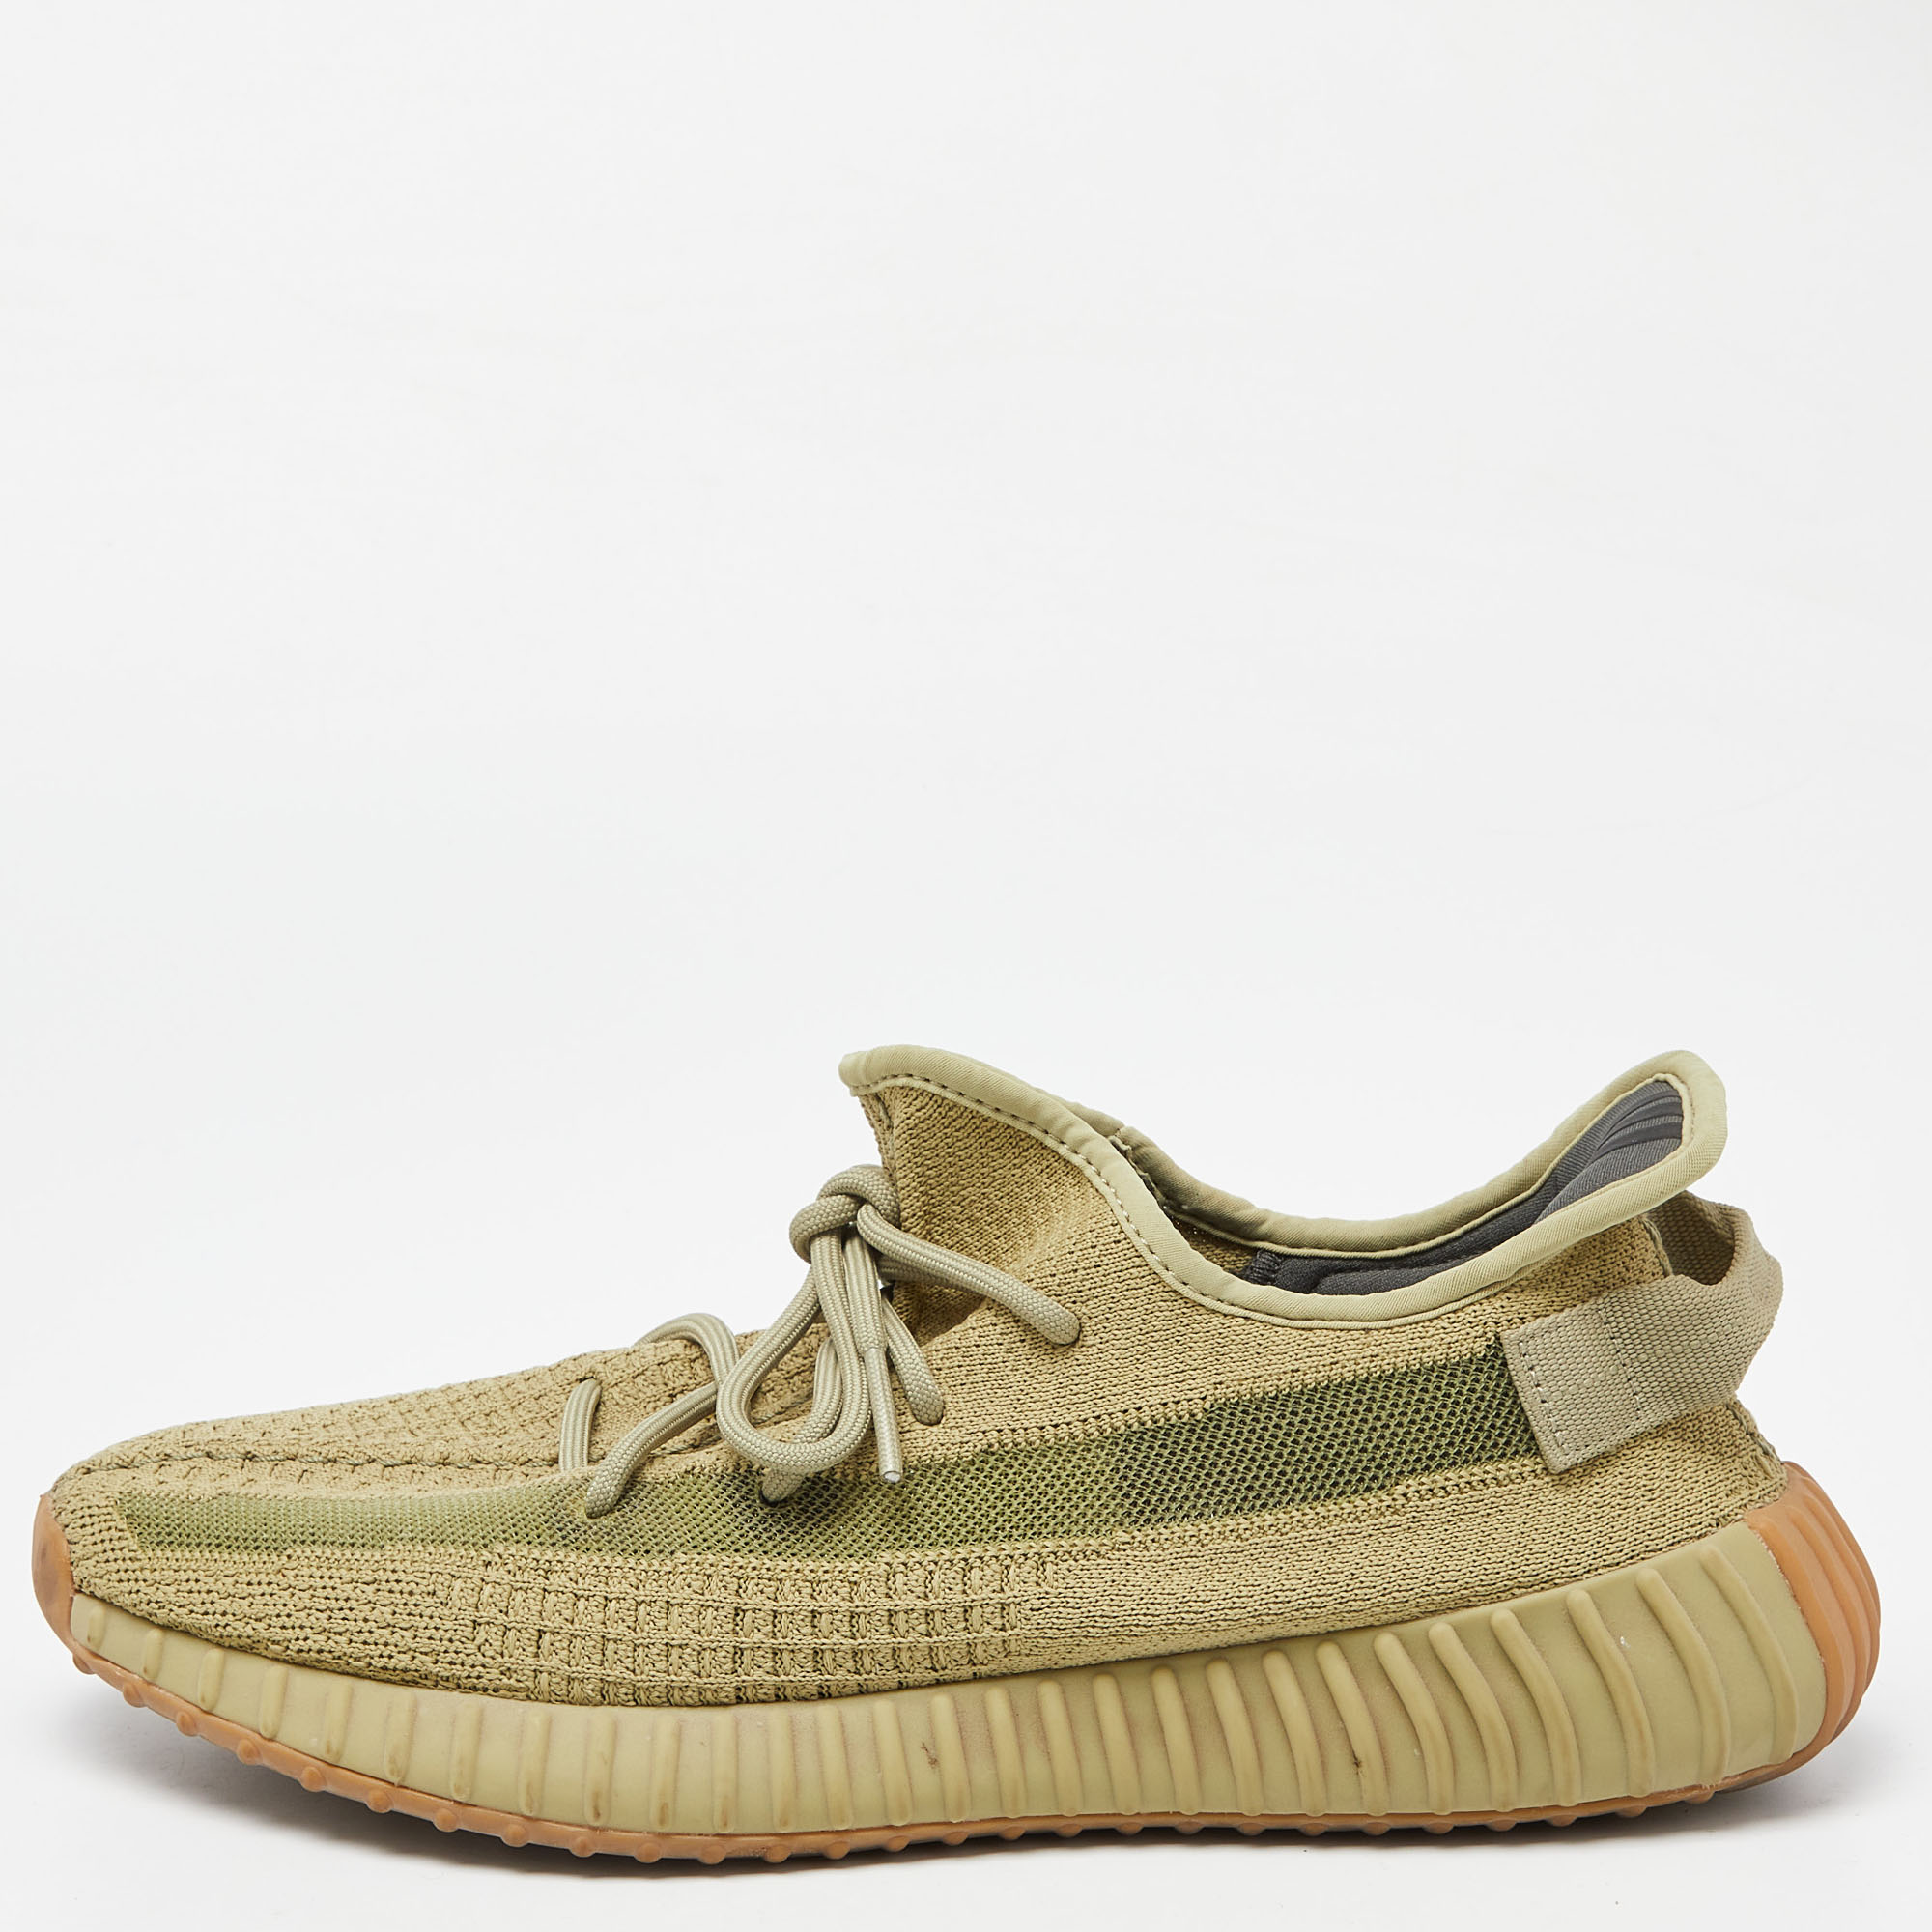 

Yeezy x Adidas Green Knit Fabric Boost 350 V2 Sulfur Sneakers Size 44 2/3